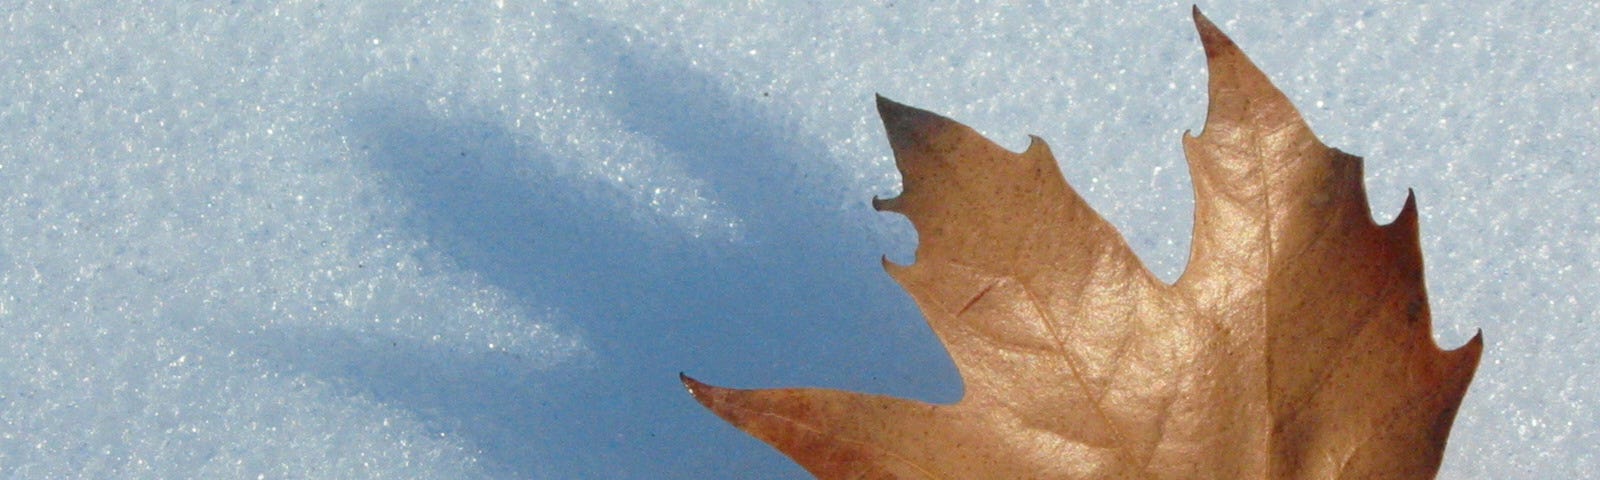 “Leaf in the snow” by quit on Freeimages Used under Freeimages Content License Agreement